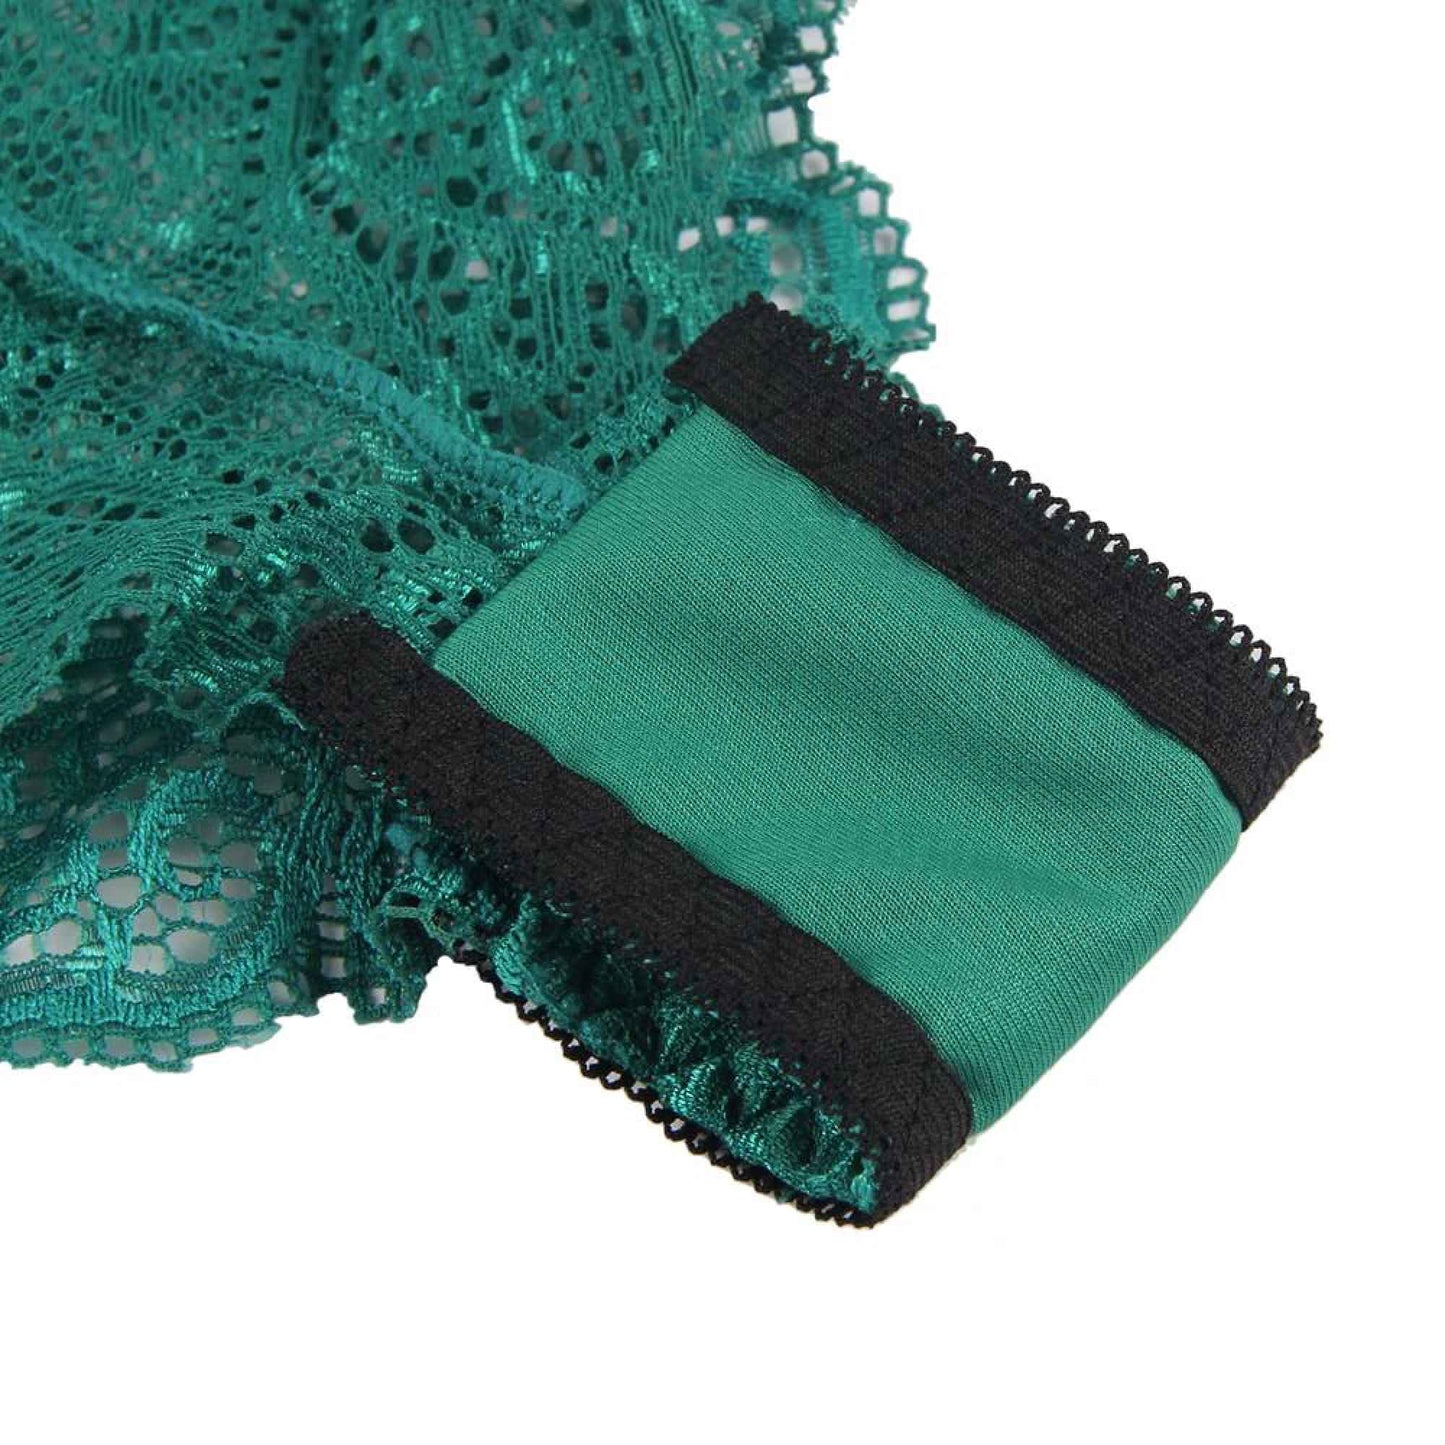 Green 3 Piece Lingerie Lace Set - Bra Panties Boxer Sexy Simulated Silk Underwear